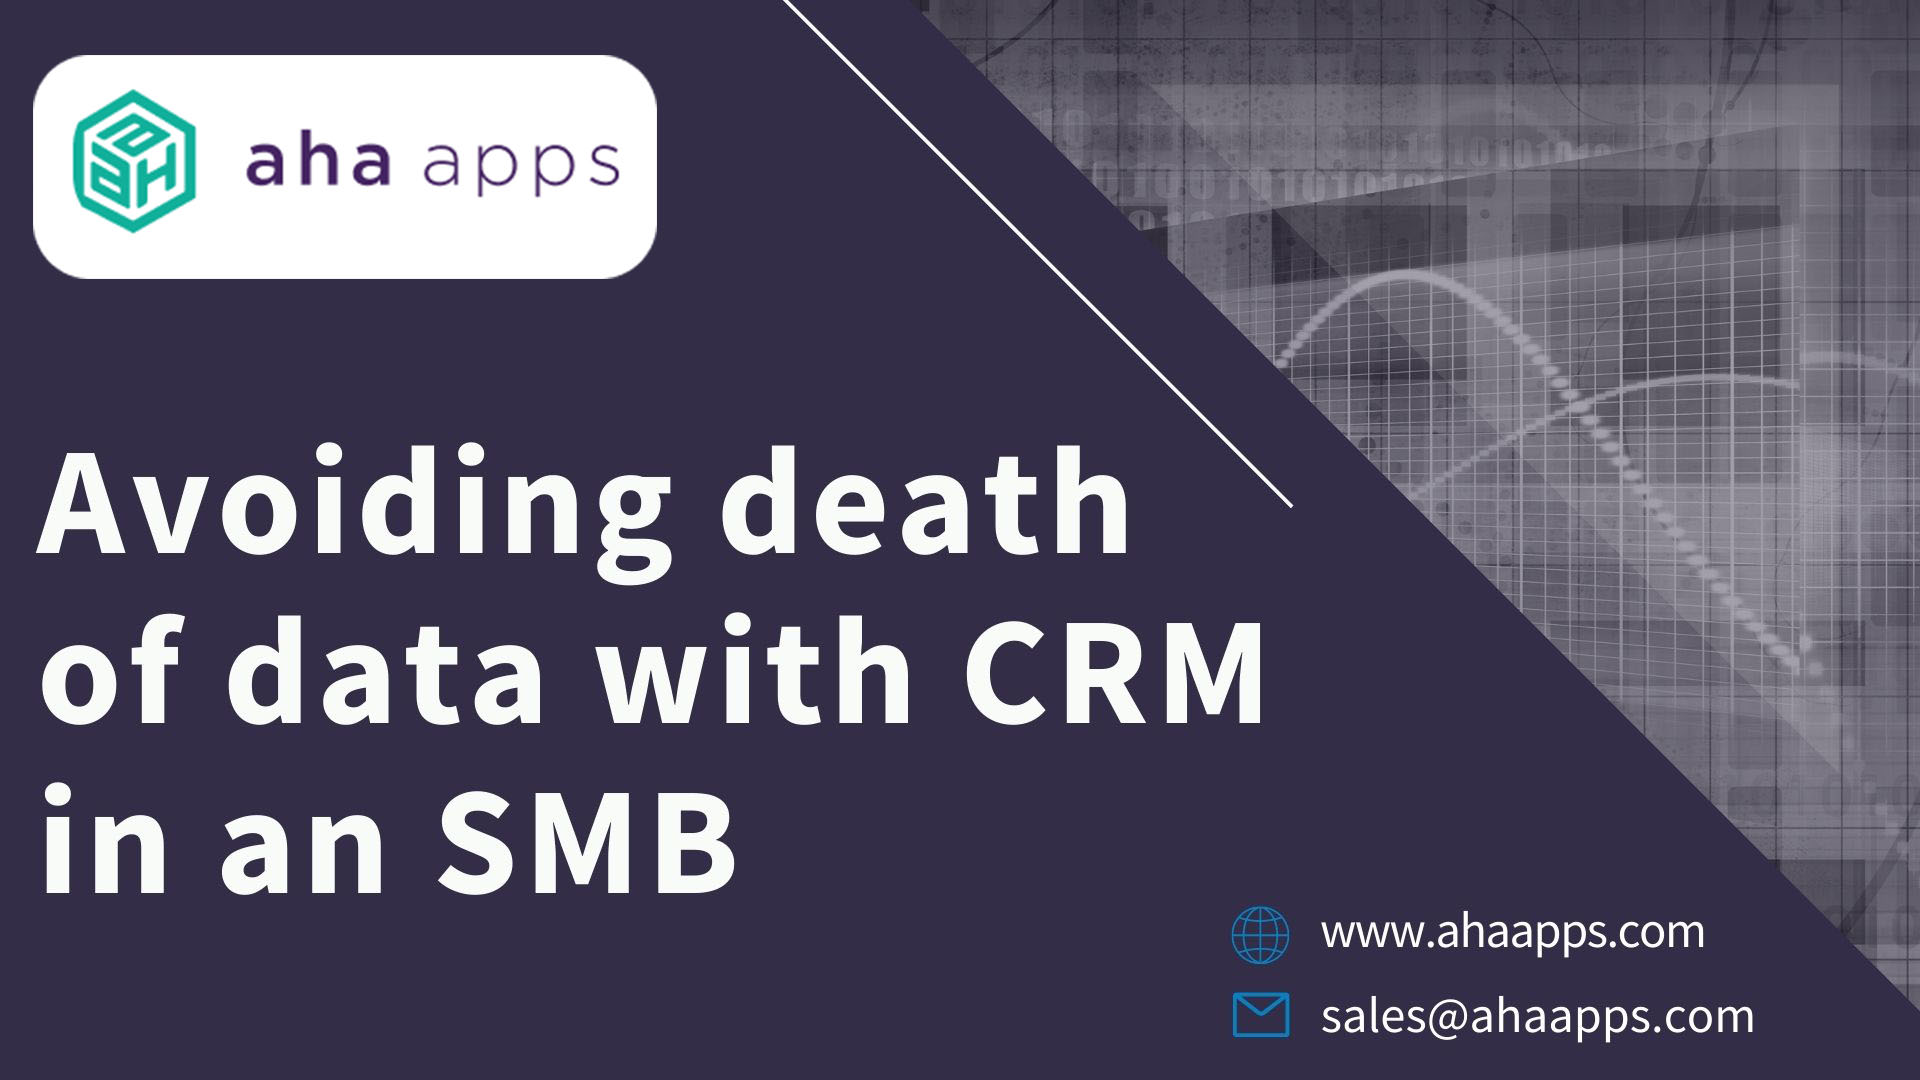 Data with CRM in an SMB - AhaApps